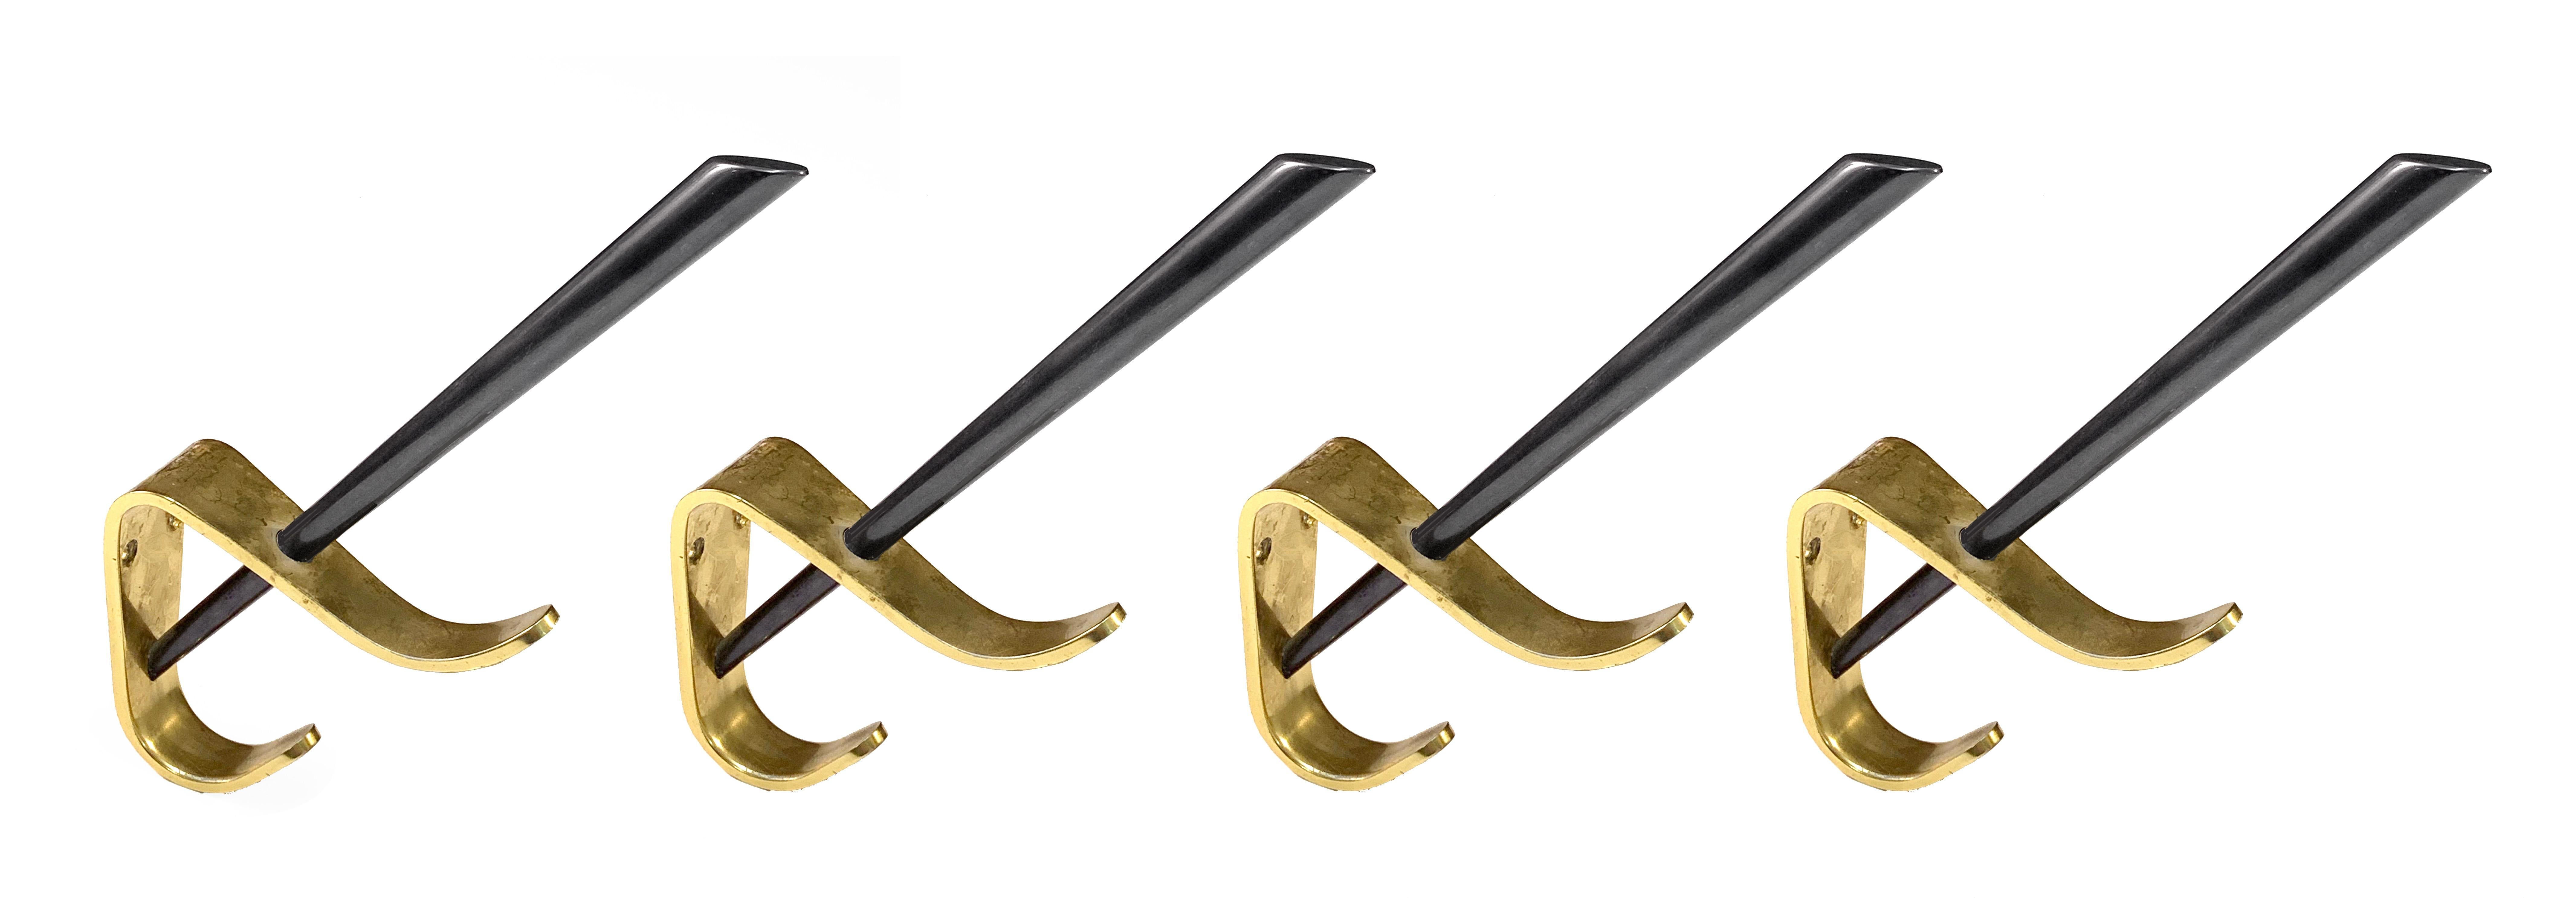 Mid-Century Modern Brass and Lacquered Aluminum Italian Coat Hooks, 1970s For Sale 8